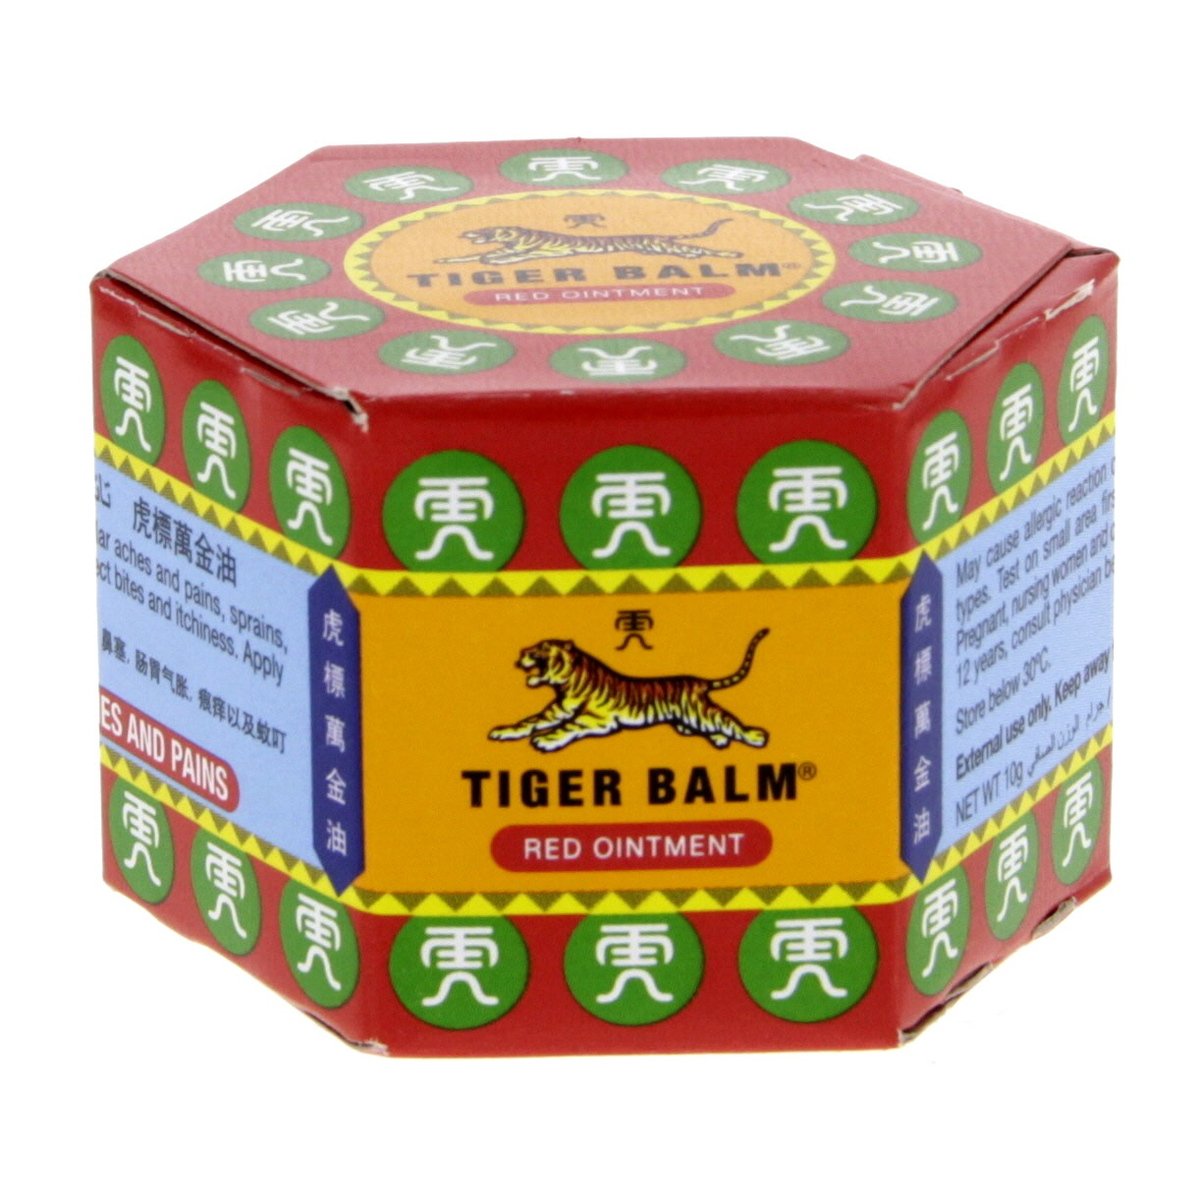 Tiger Balm Red Ointment 19 g